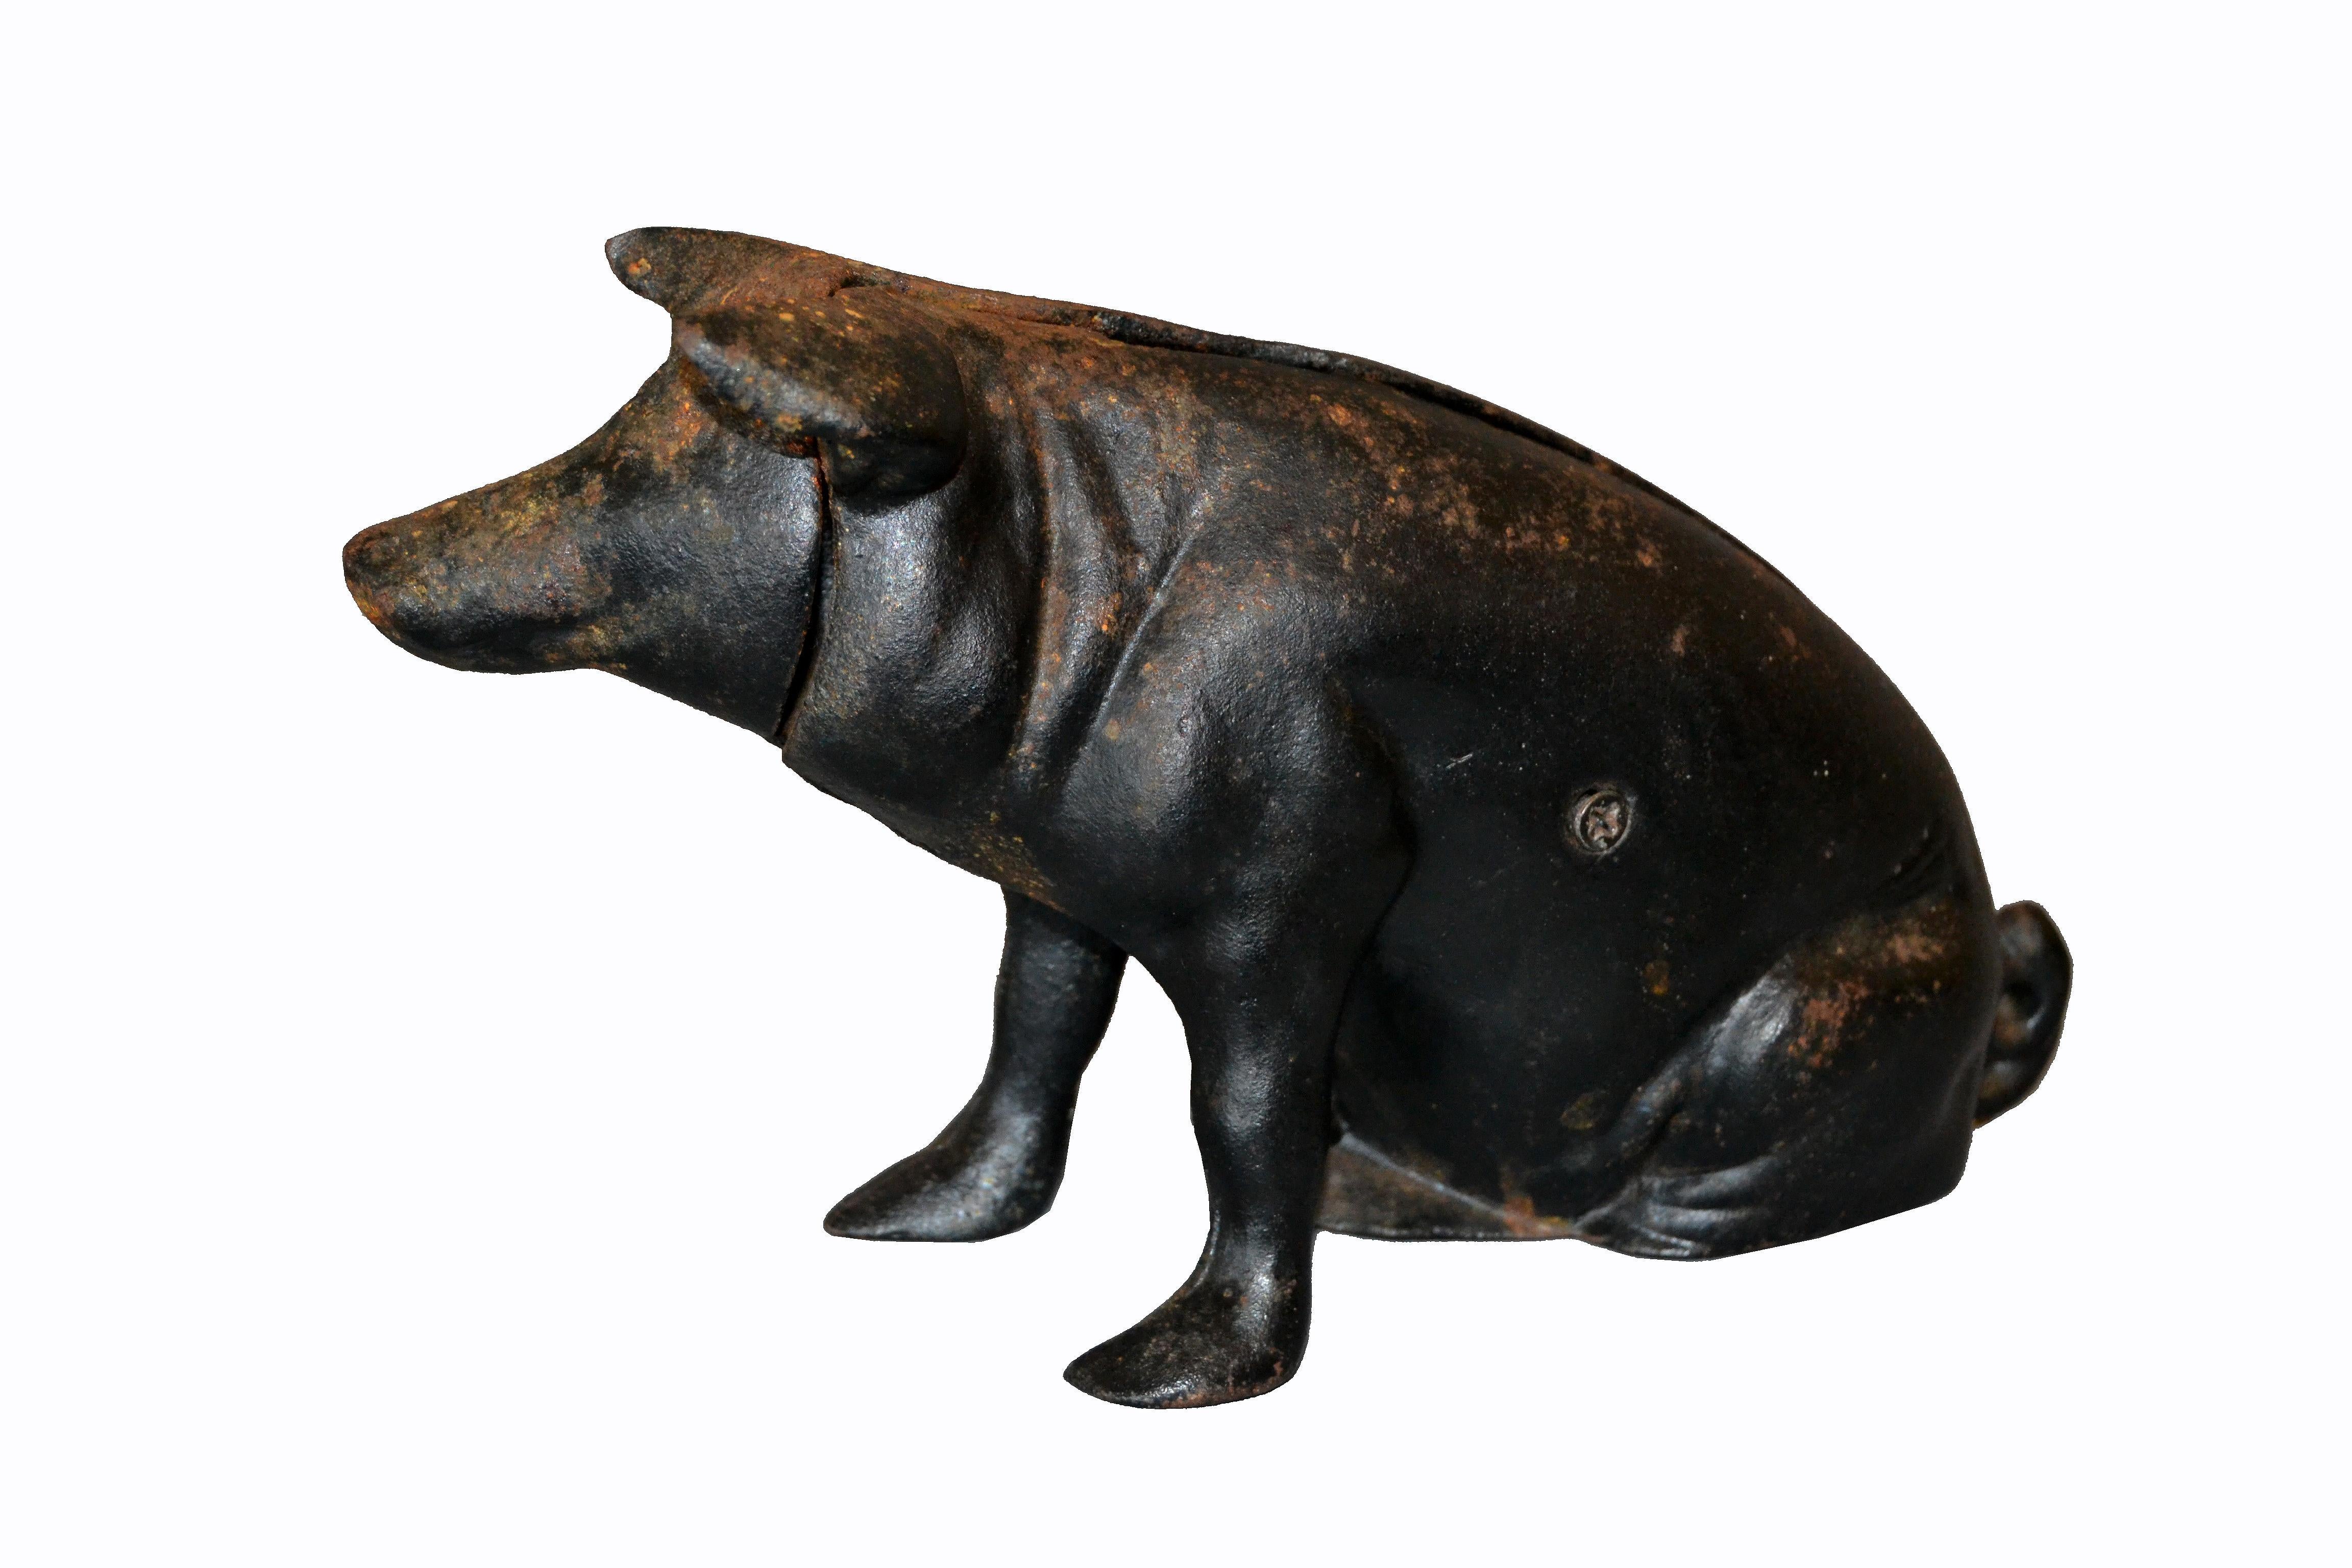 19th century American black cast iron piggy bank, money box, animal sculpture.
We left it intentionally in the distressed look to show its age.
It has visible signs of previous use that may include scratches, gouges, cracks, patina and worn